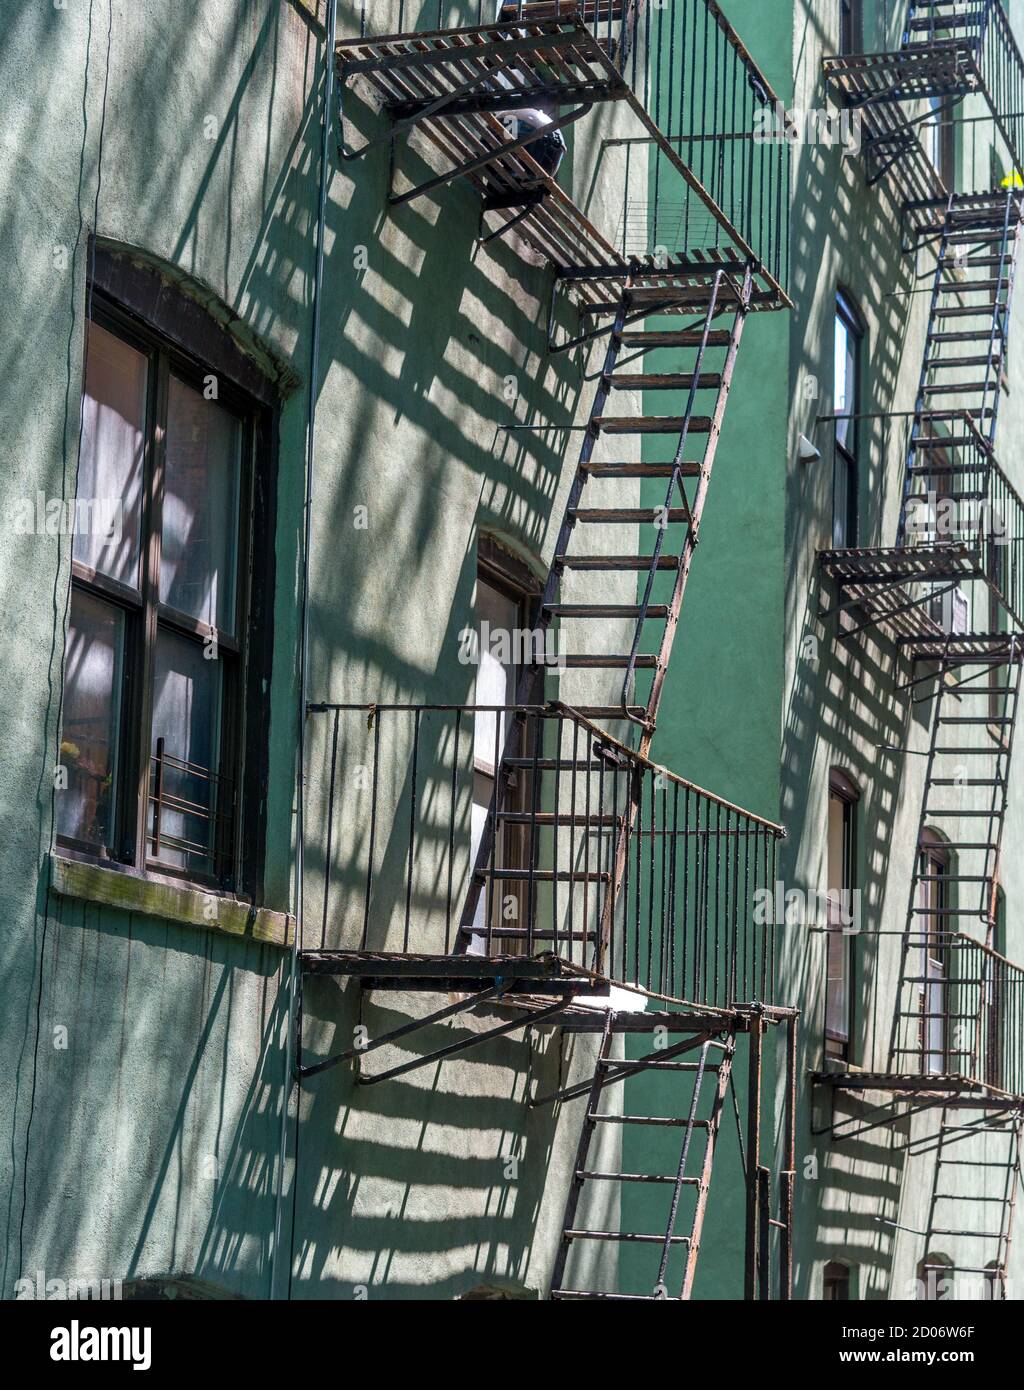 Fire escapes in New York. Photo by Liz Roll Stock Photo